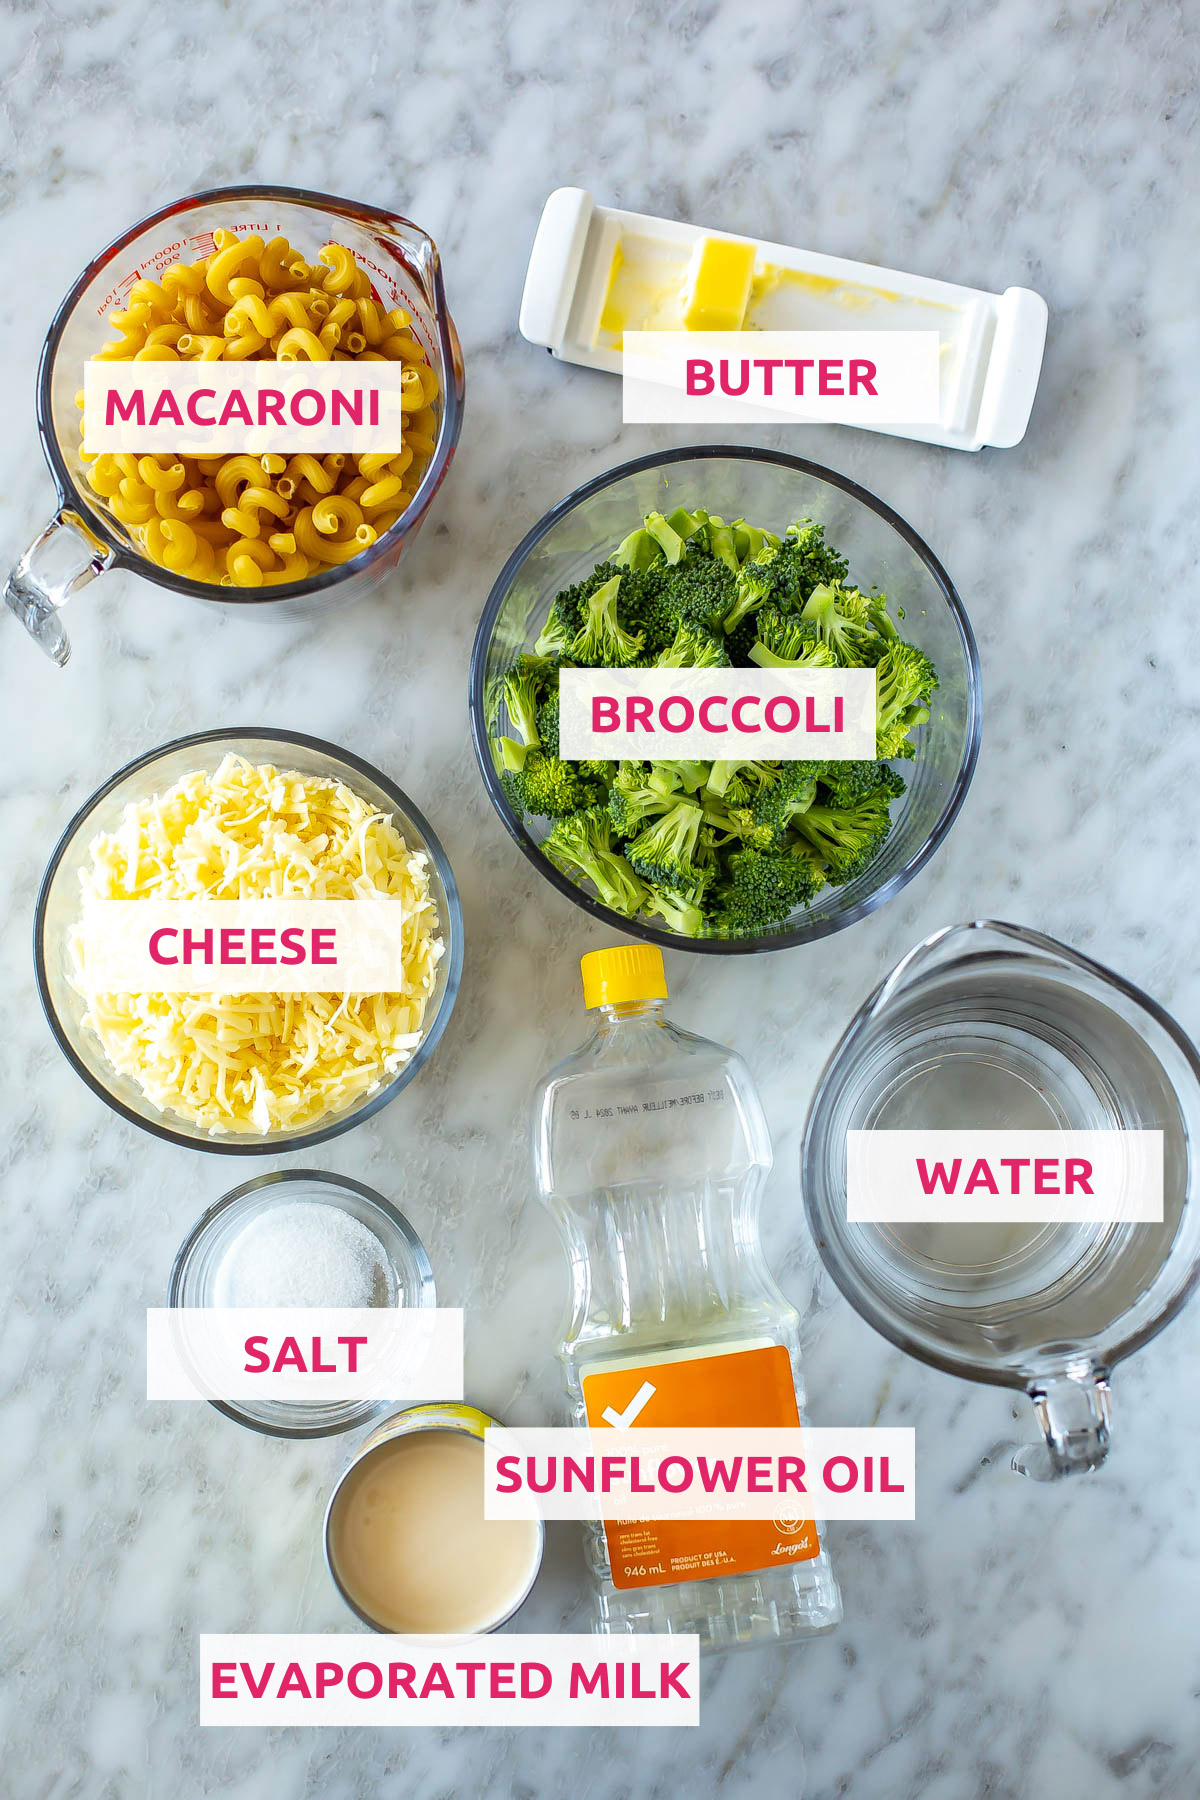 Ingredients for Instant Pot mac and cheese: macaroni, cheese, butter, broccoli, water, salt, evaporated milk and sunflower oil.